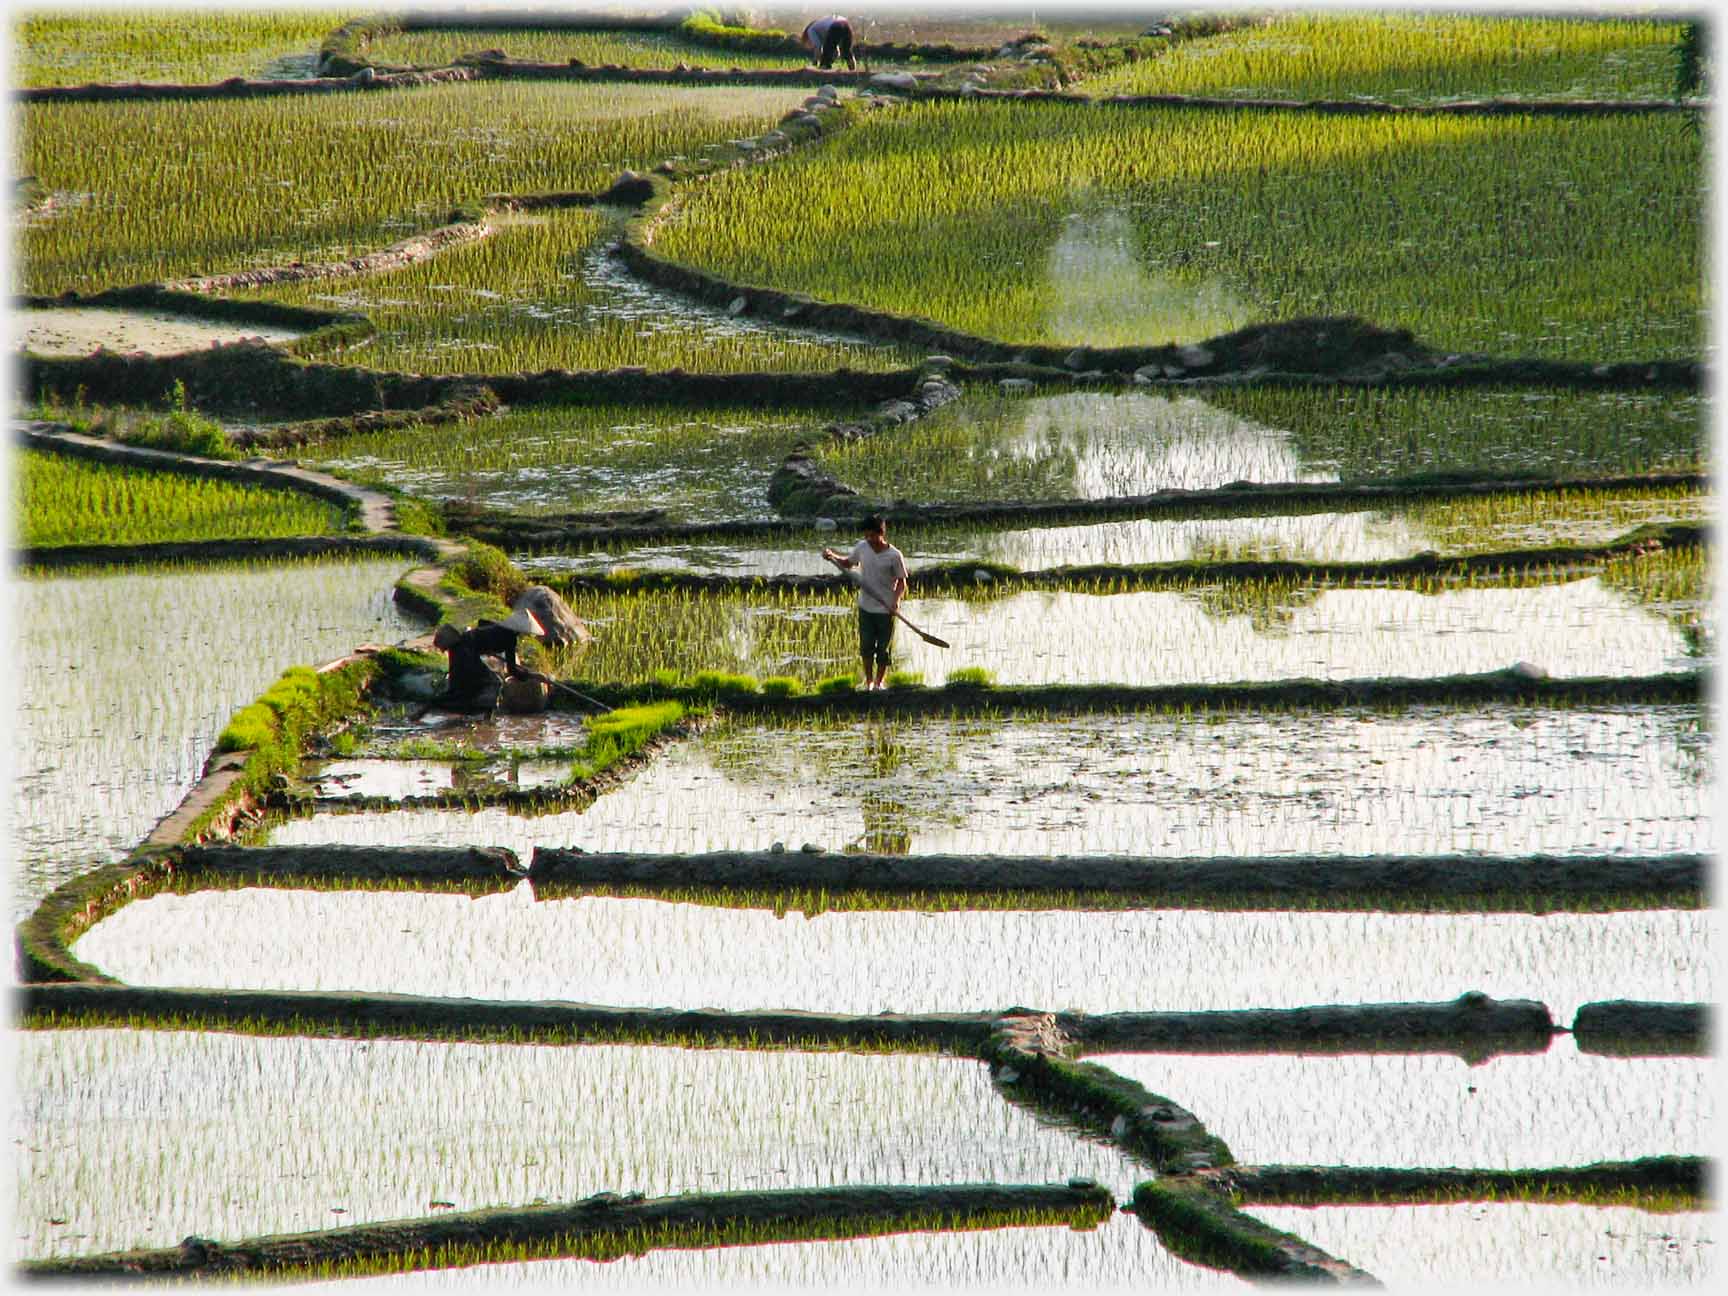 Fields covered in young paddy.